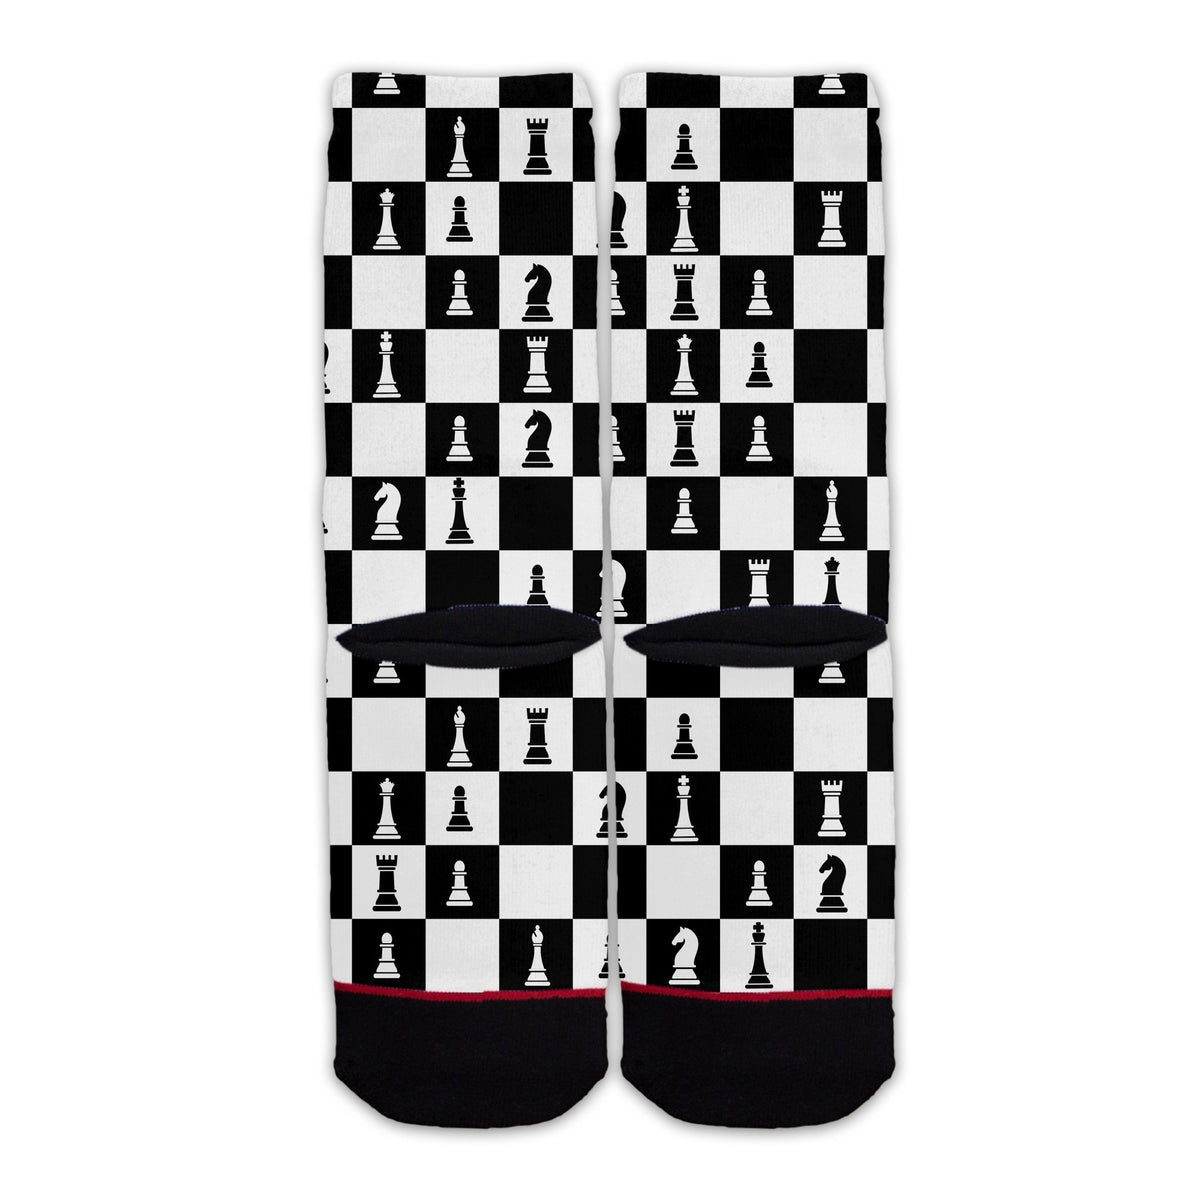 Function - Chess Board Pieces Pattern Socks